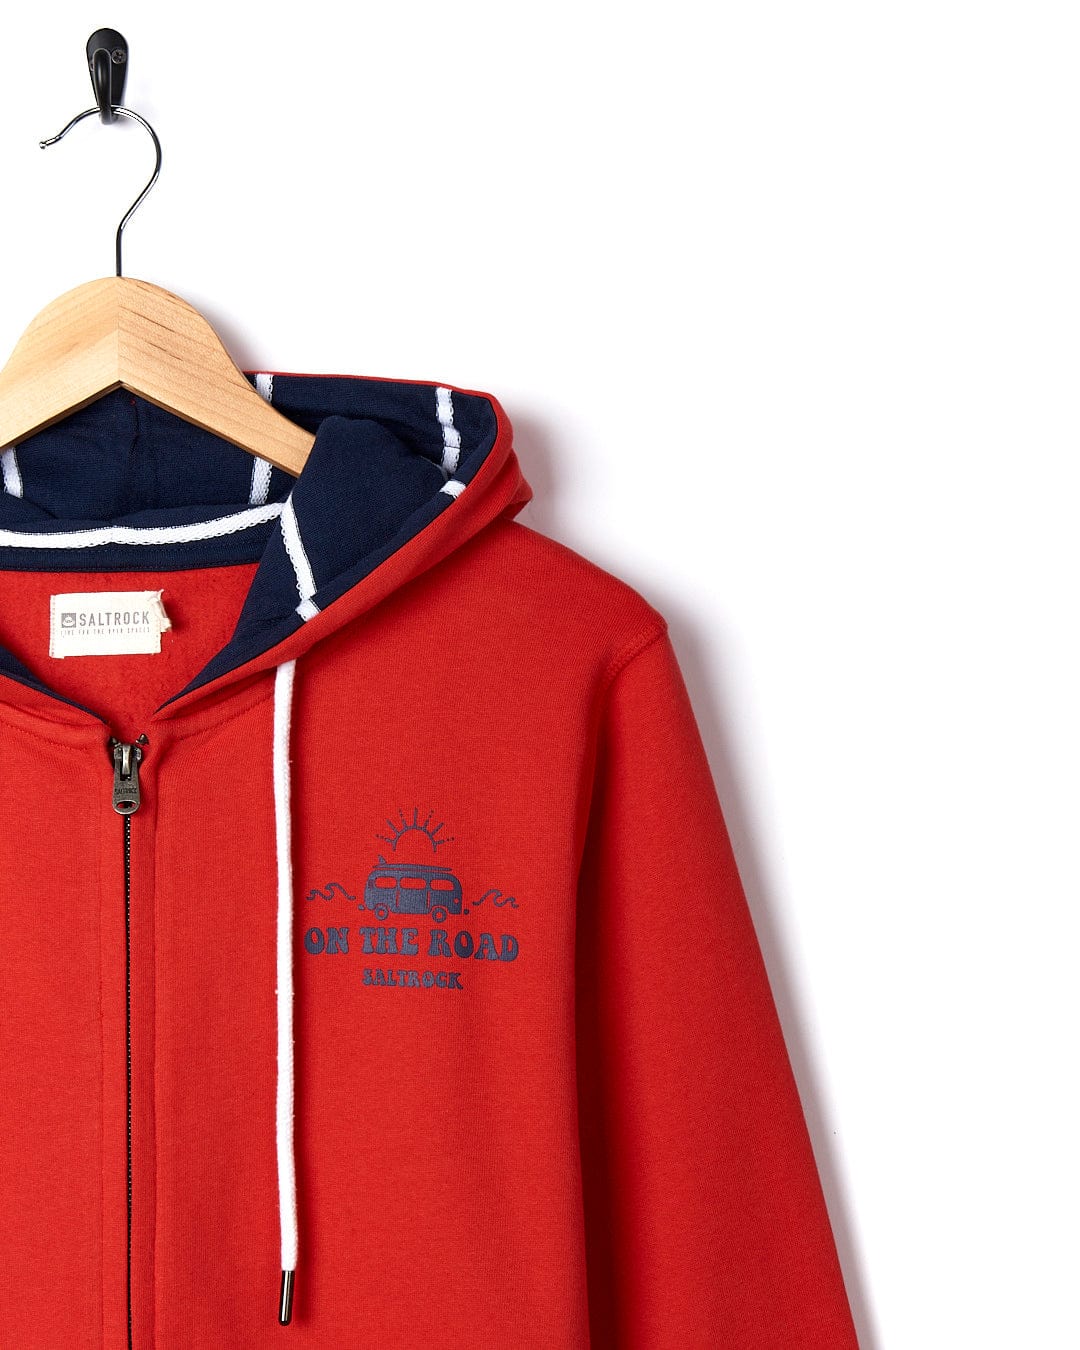 A On The Road Wales - Women's Zip Hoodie - Red by Saltrock with a navy logo on it.